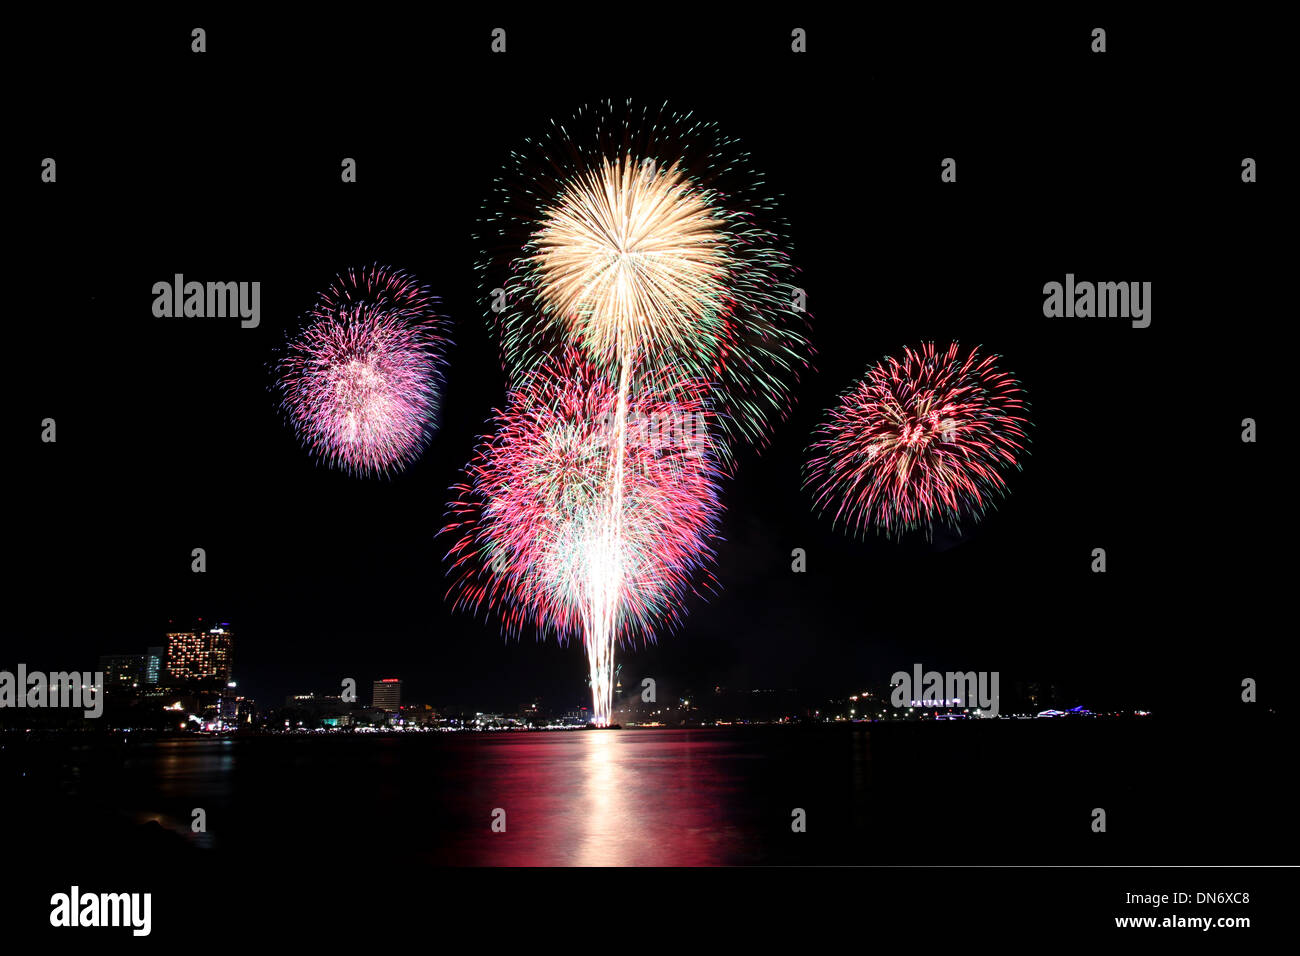 Variety of colors Fireworks or firecracker in the darkness at Pattaya city,Thailand. Stock Photo